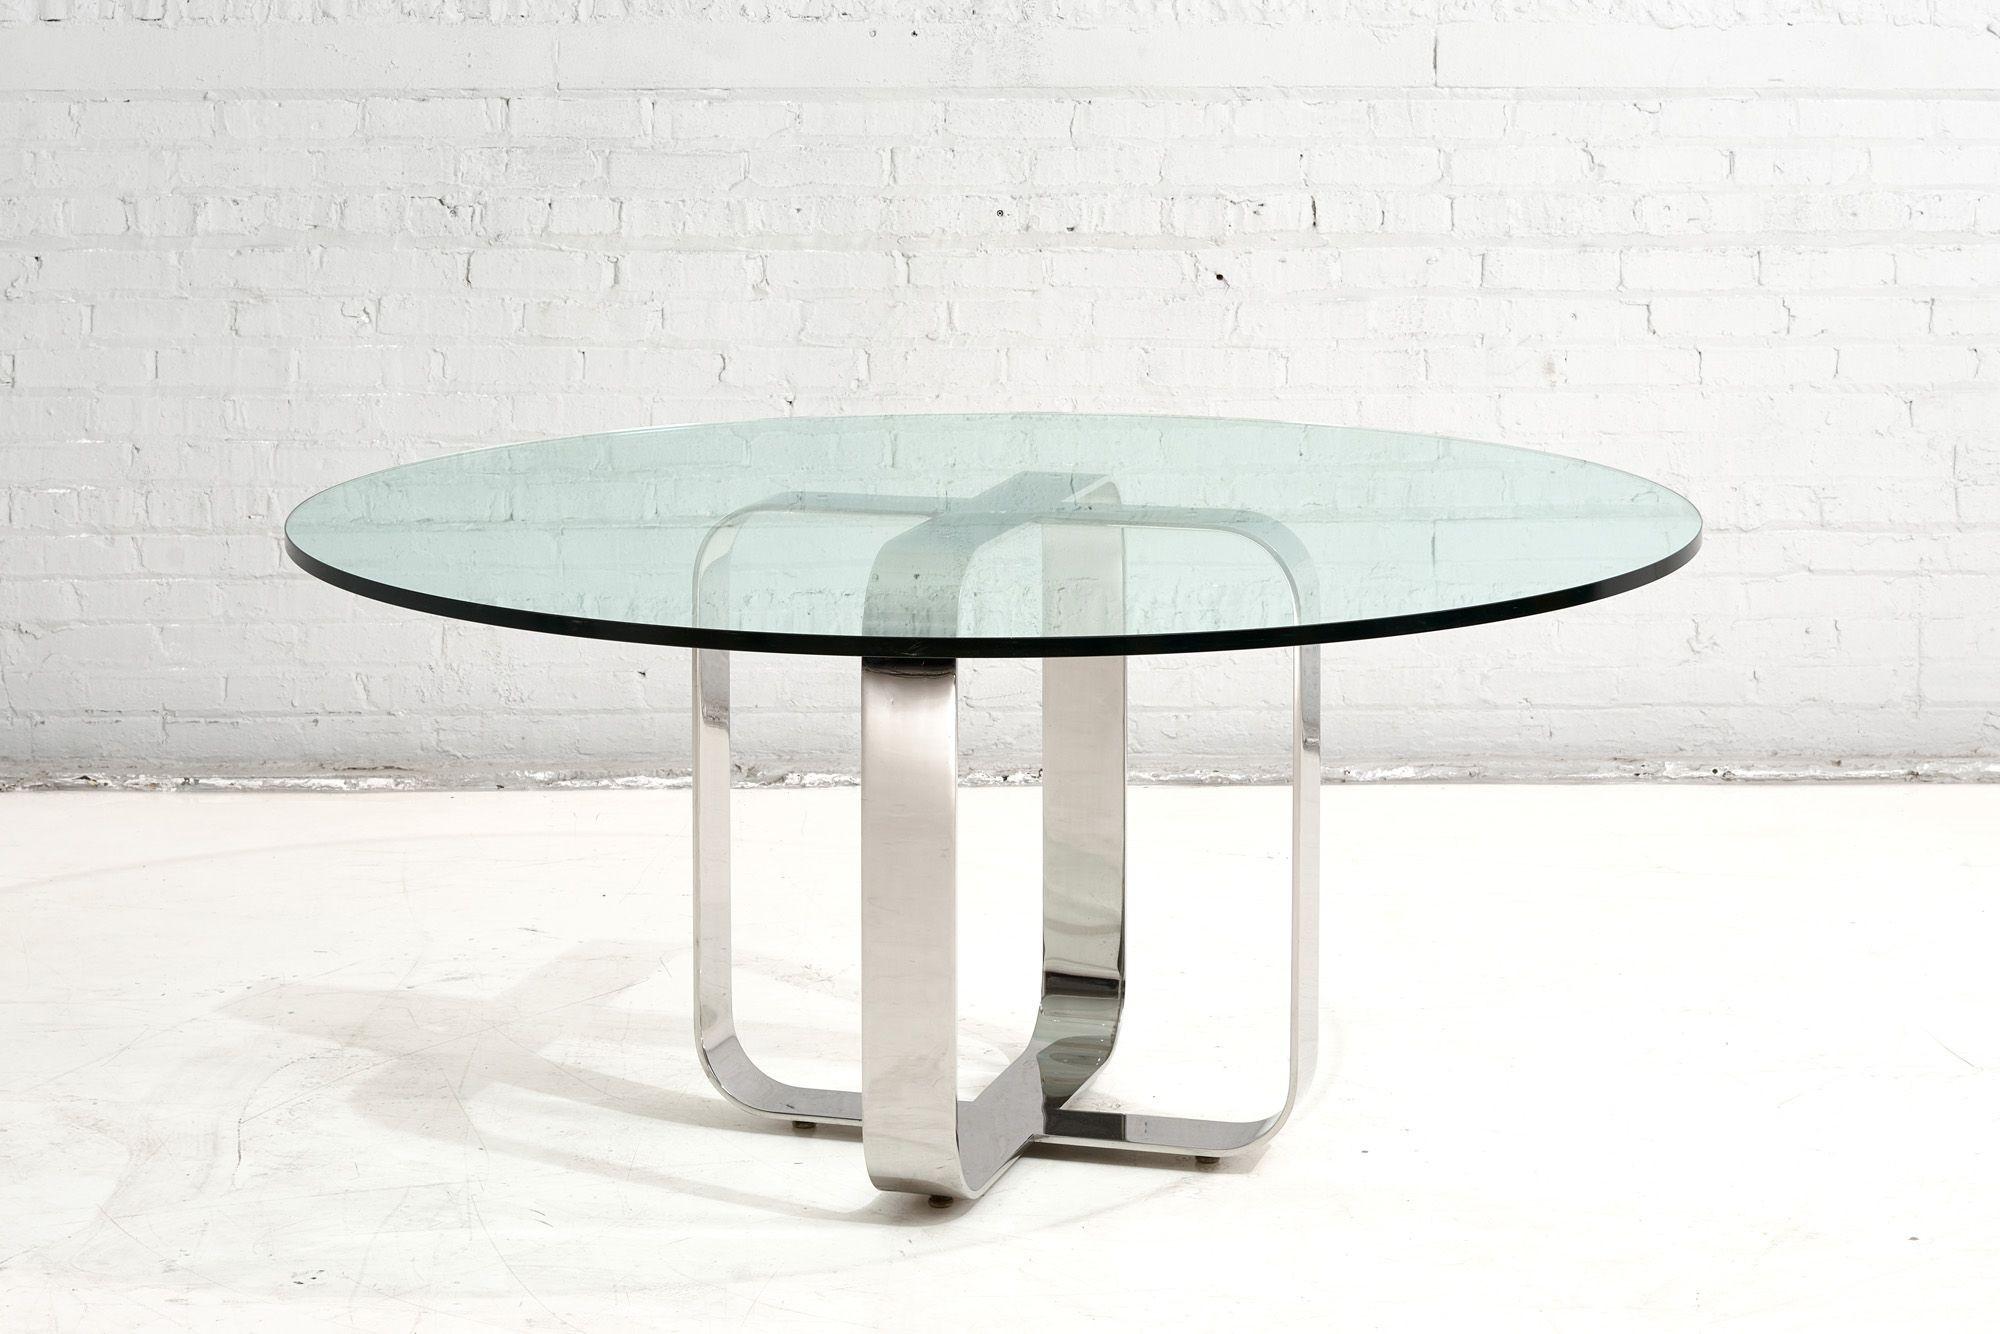 Mid-Century Modern Gary Gutterman Stainless Steel and Glass Dining Table, Axius Designs, 1970 For Sale